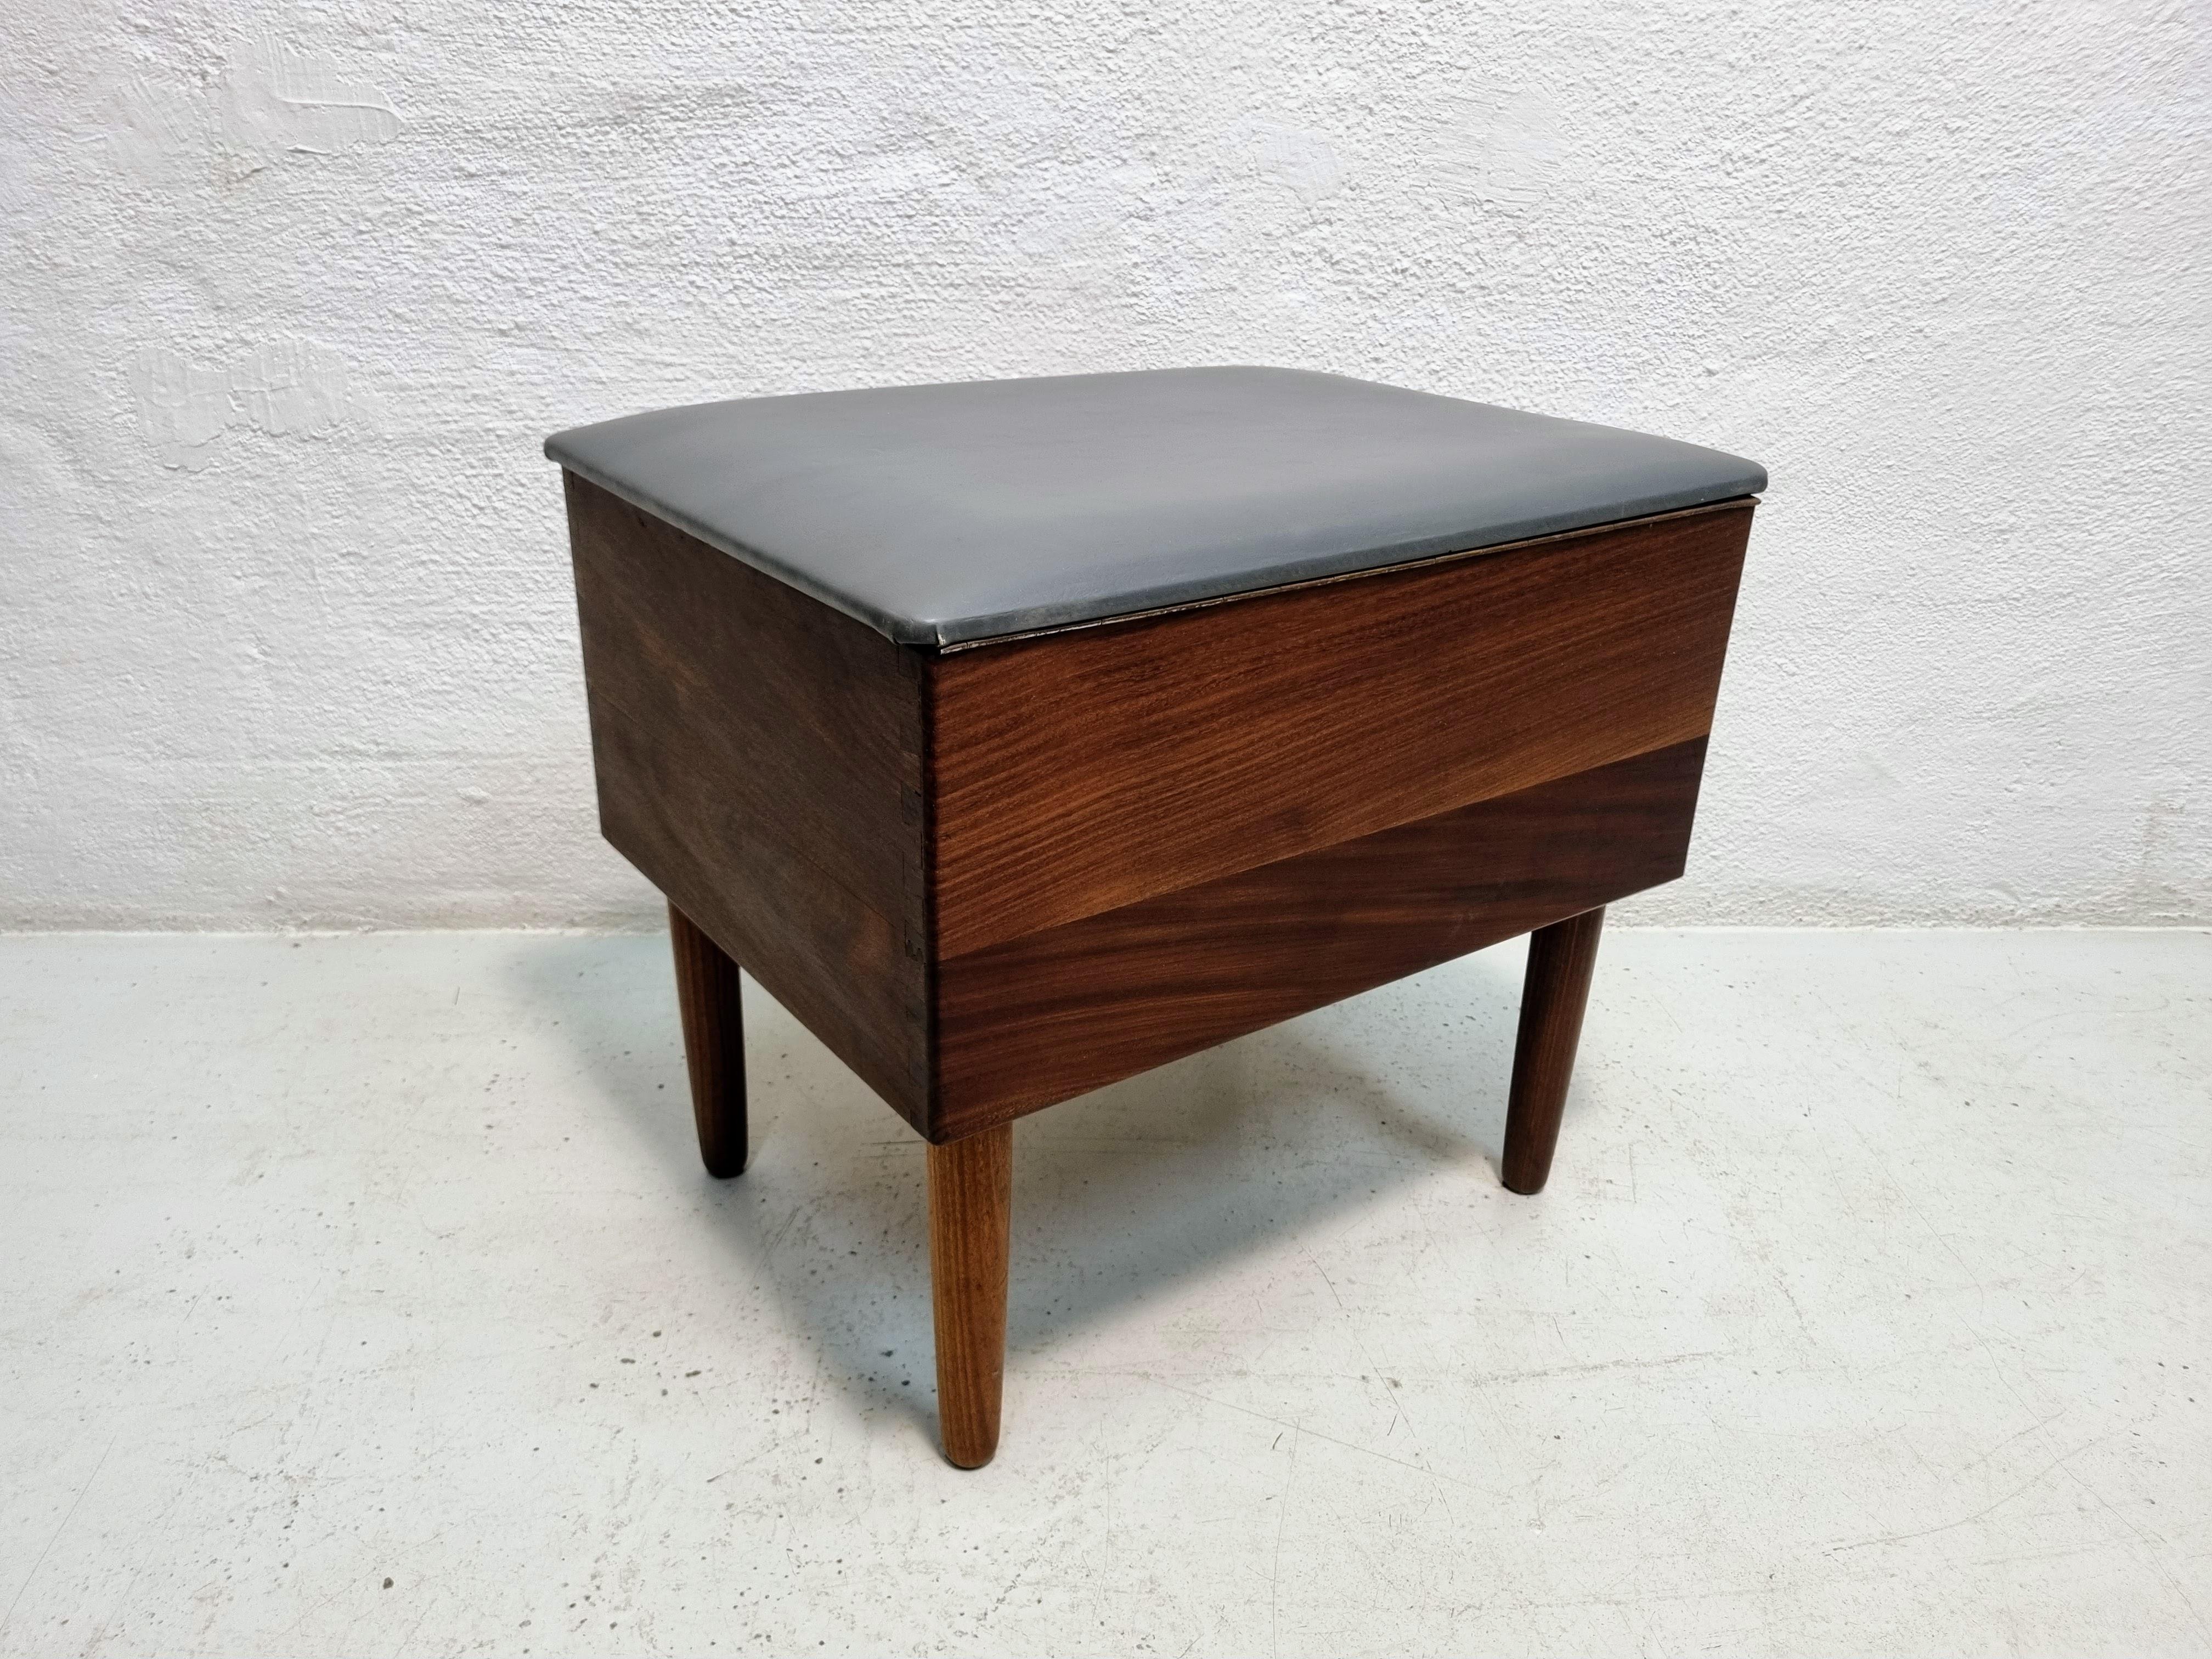 Danish Teak stool with storage compartment For Sale